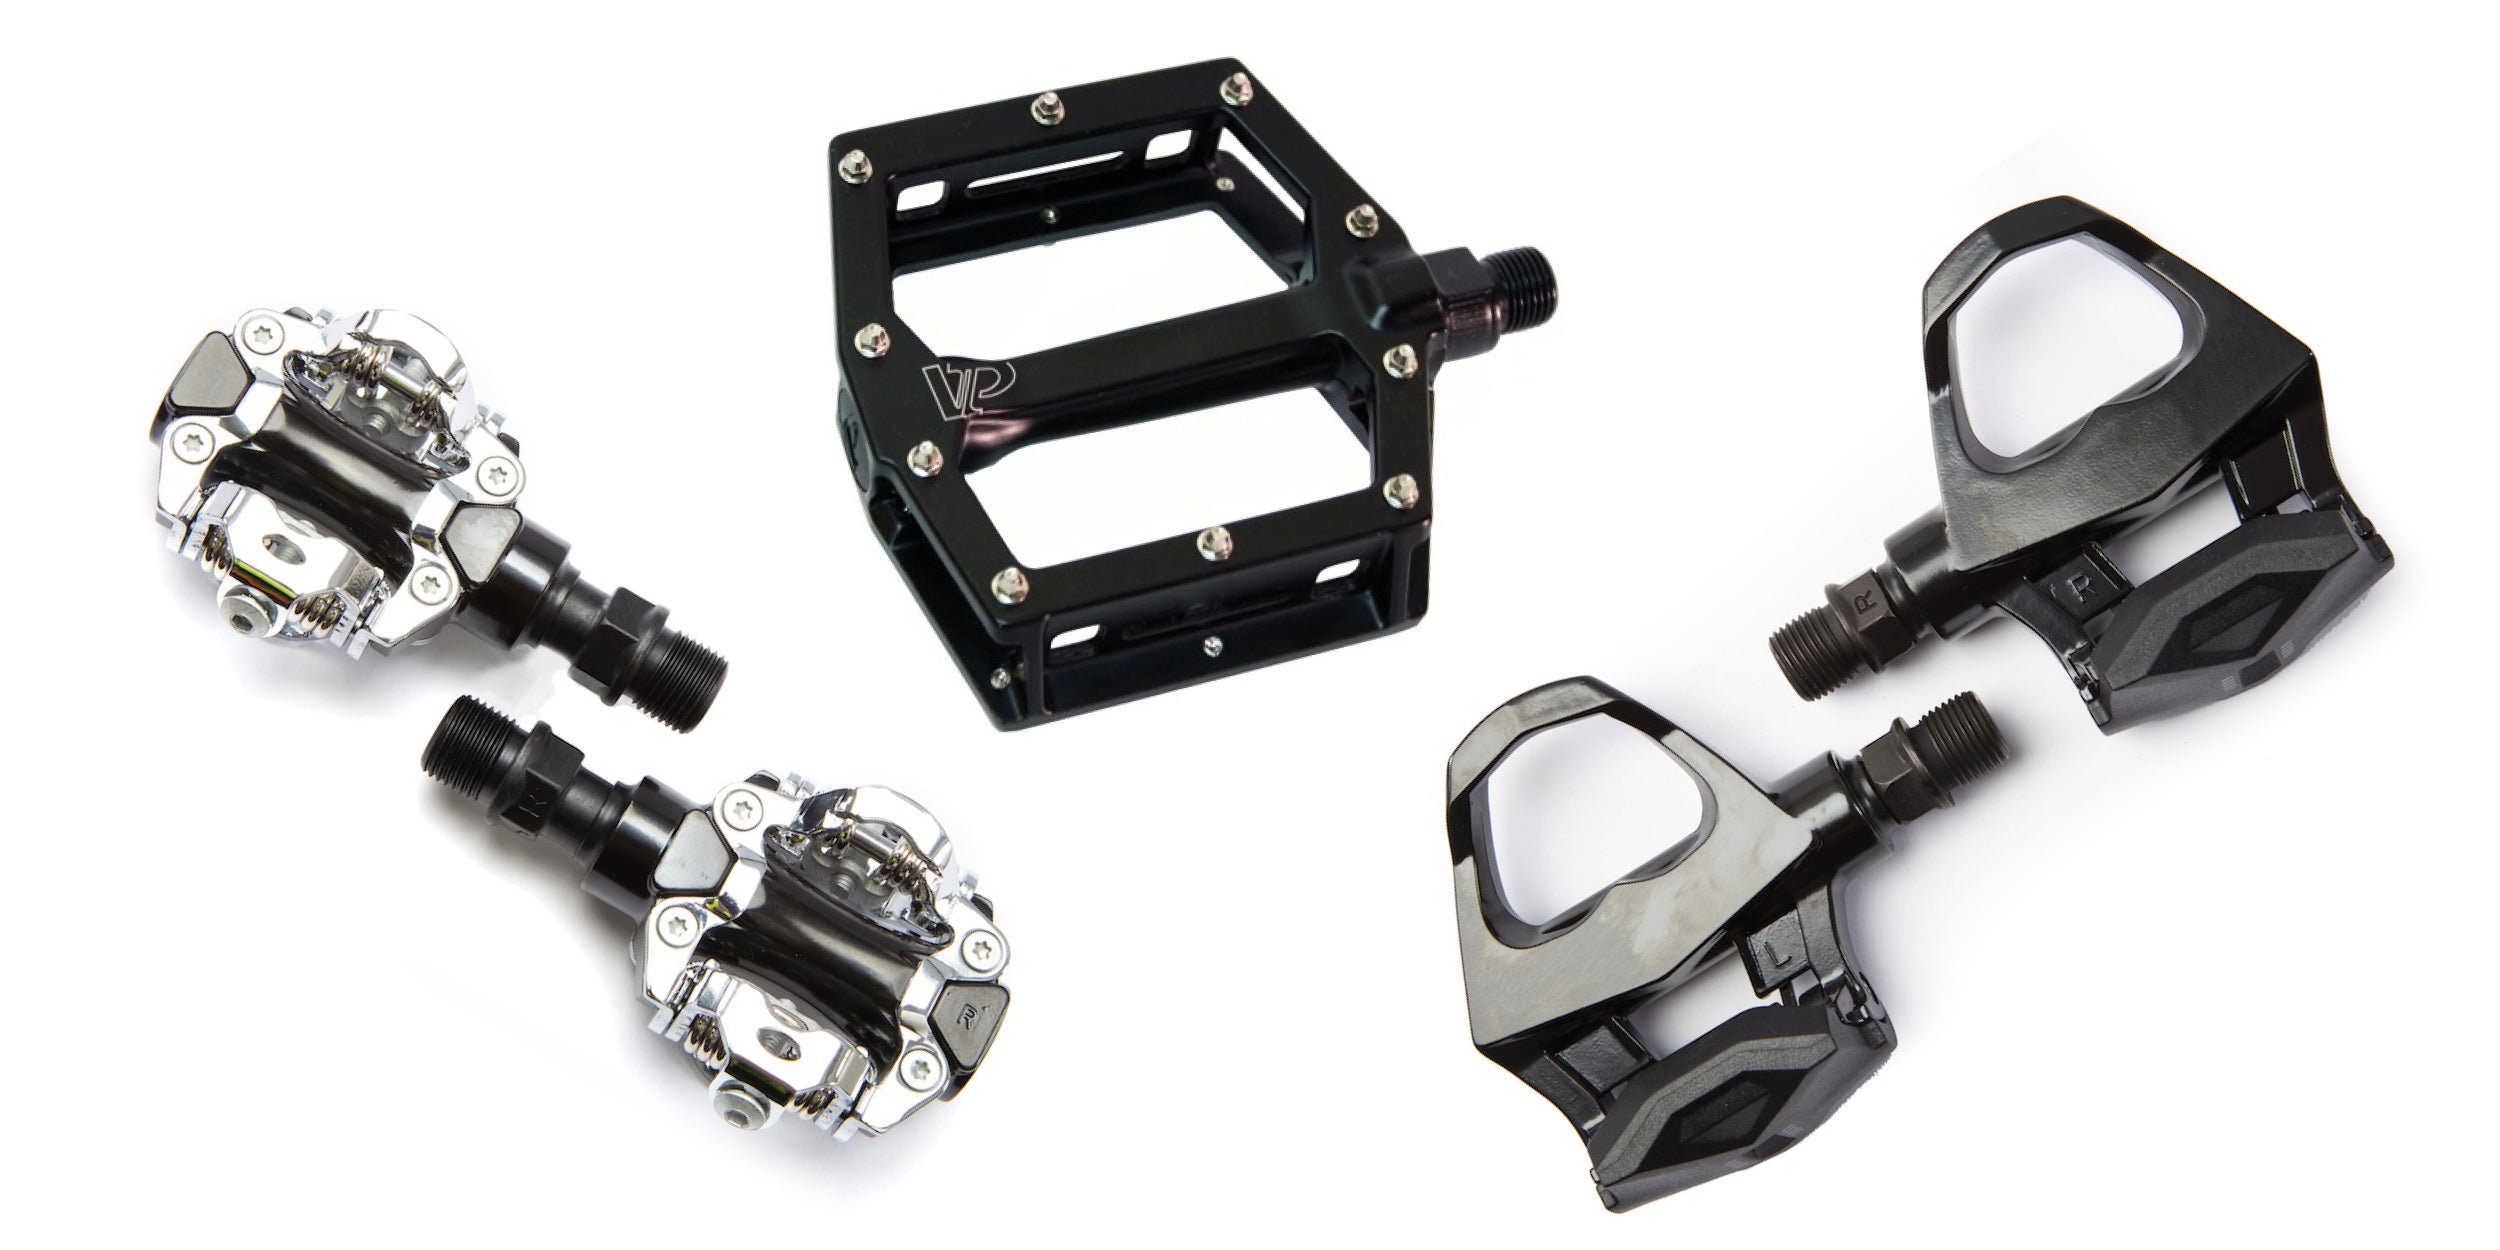 What are the different types of bike pedals?